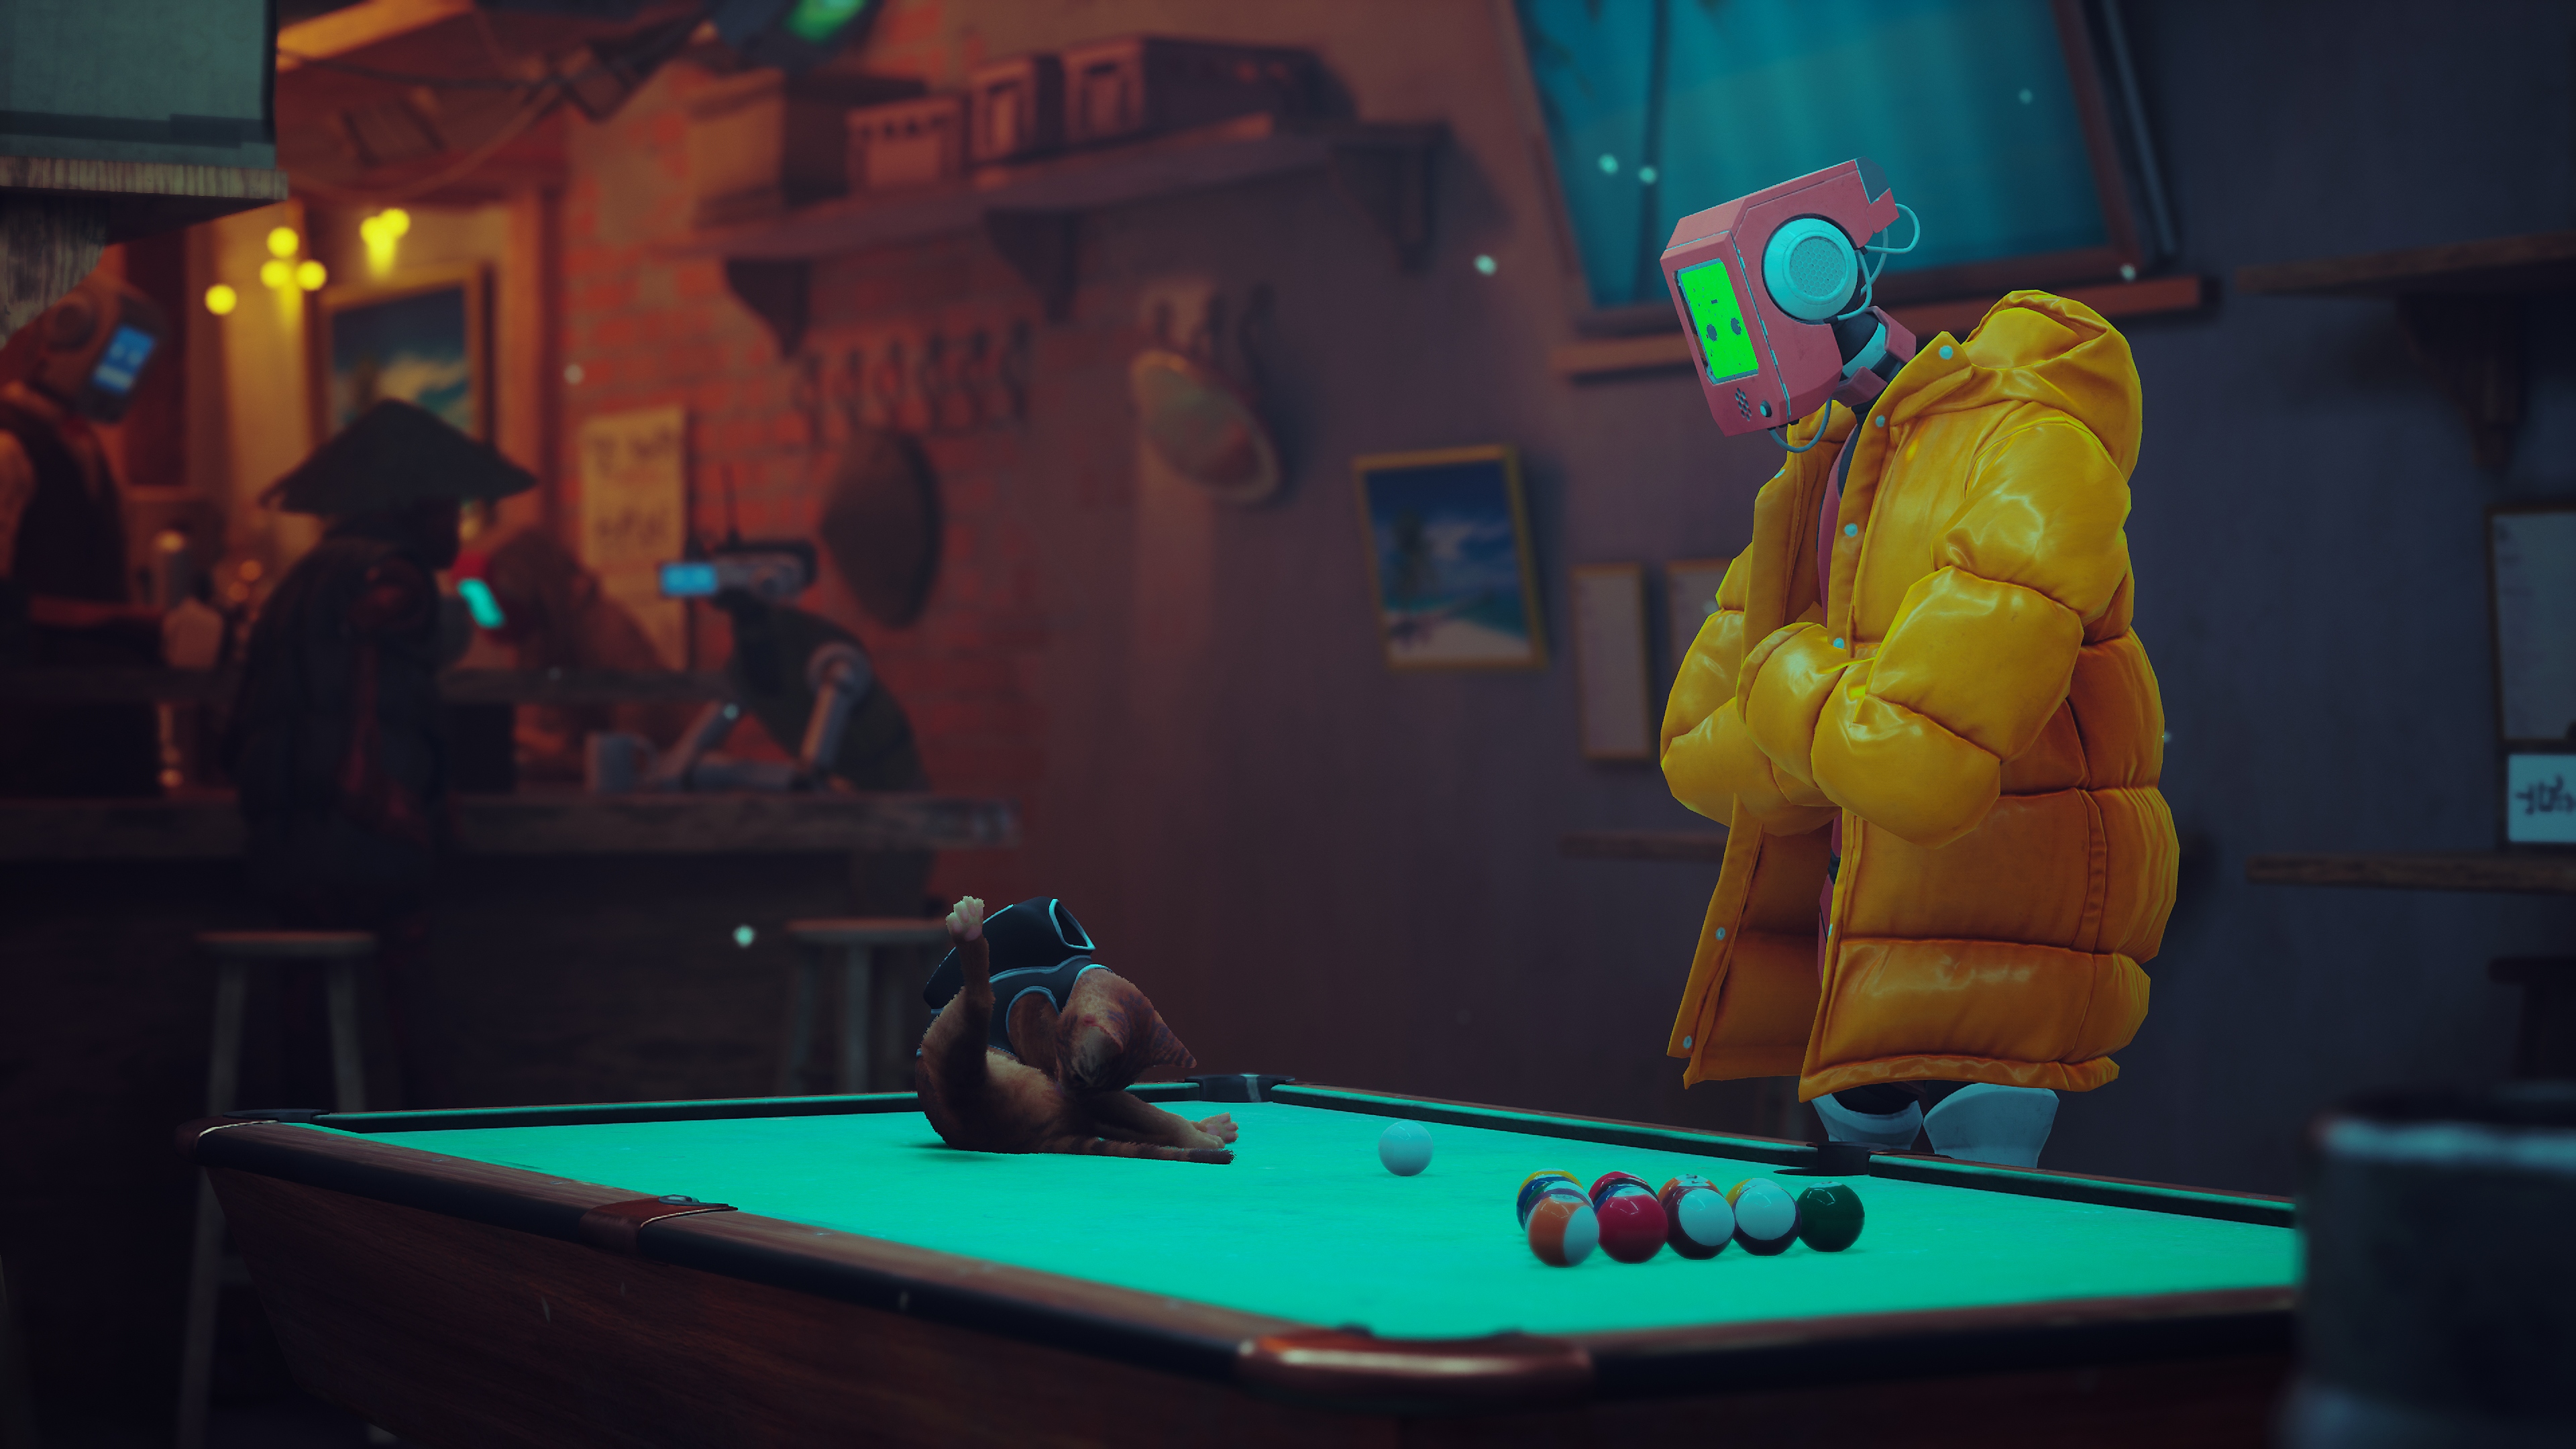 Stray screenshot showing a cat sitting on a pool table next to a robot